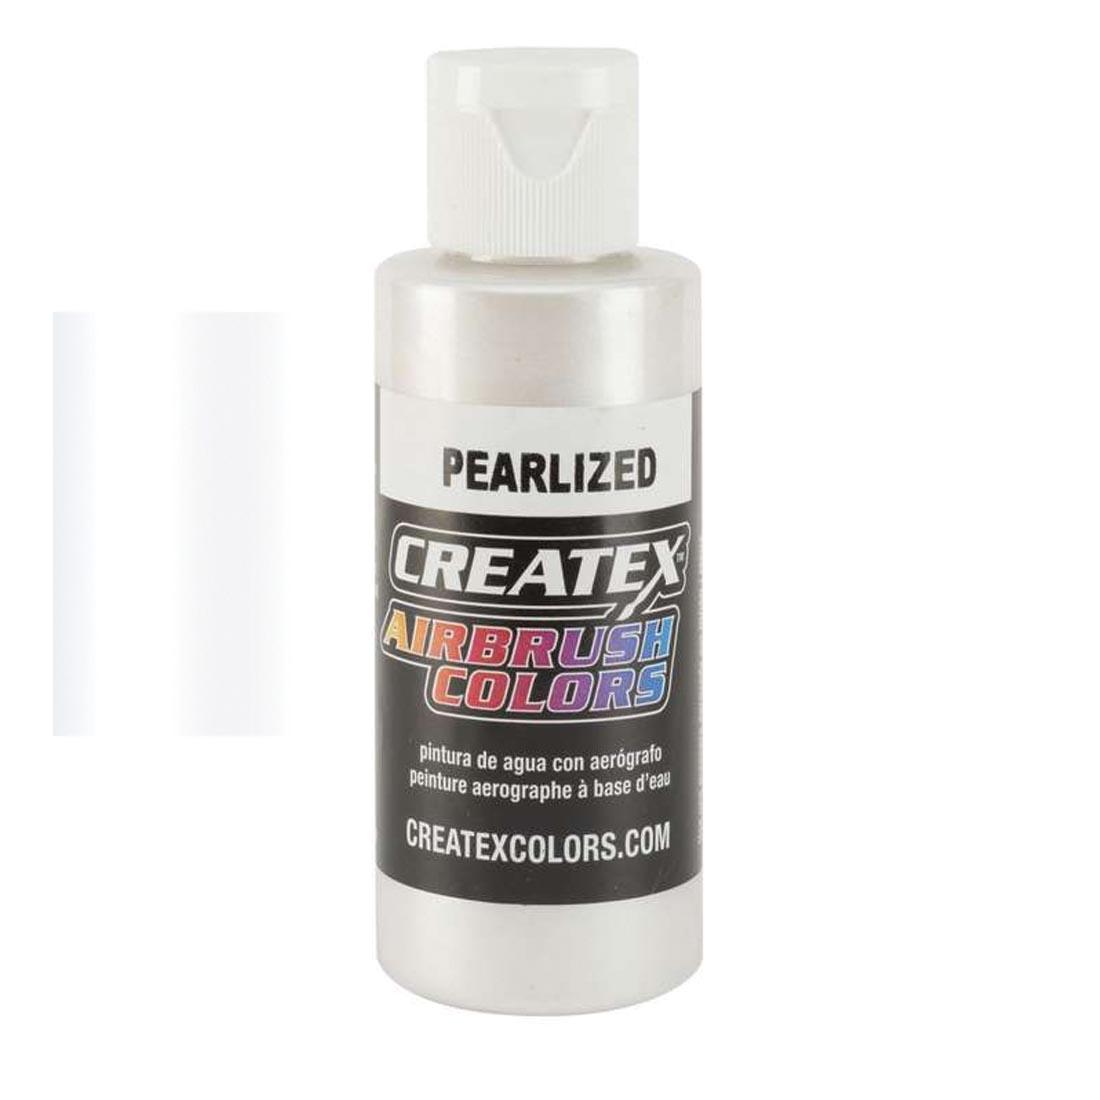 Bottle of Createx Airbrush Color Beside Pearlized White Color Swatch